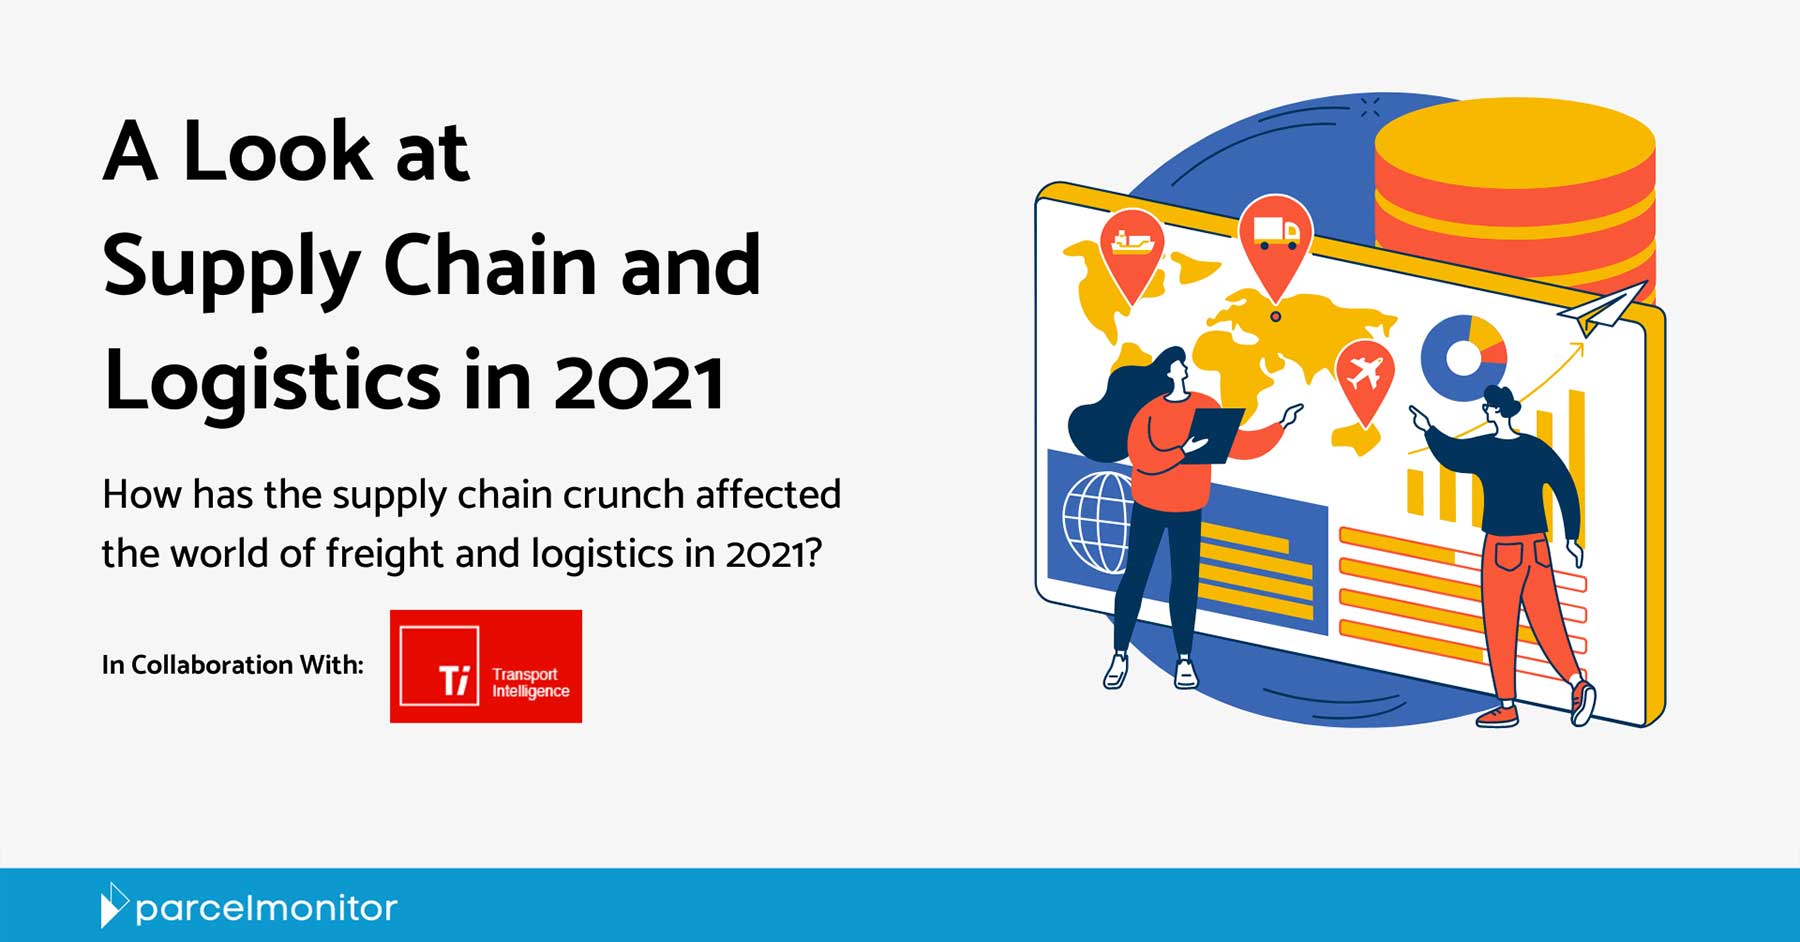 Parcel Monitor: A Look at Supply Chain and Logistics 2021 Featured Image